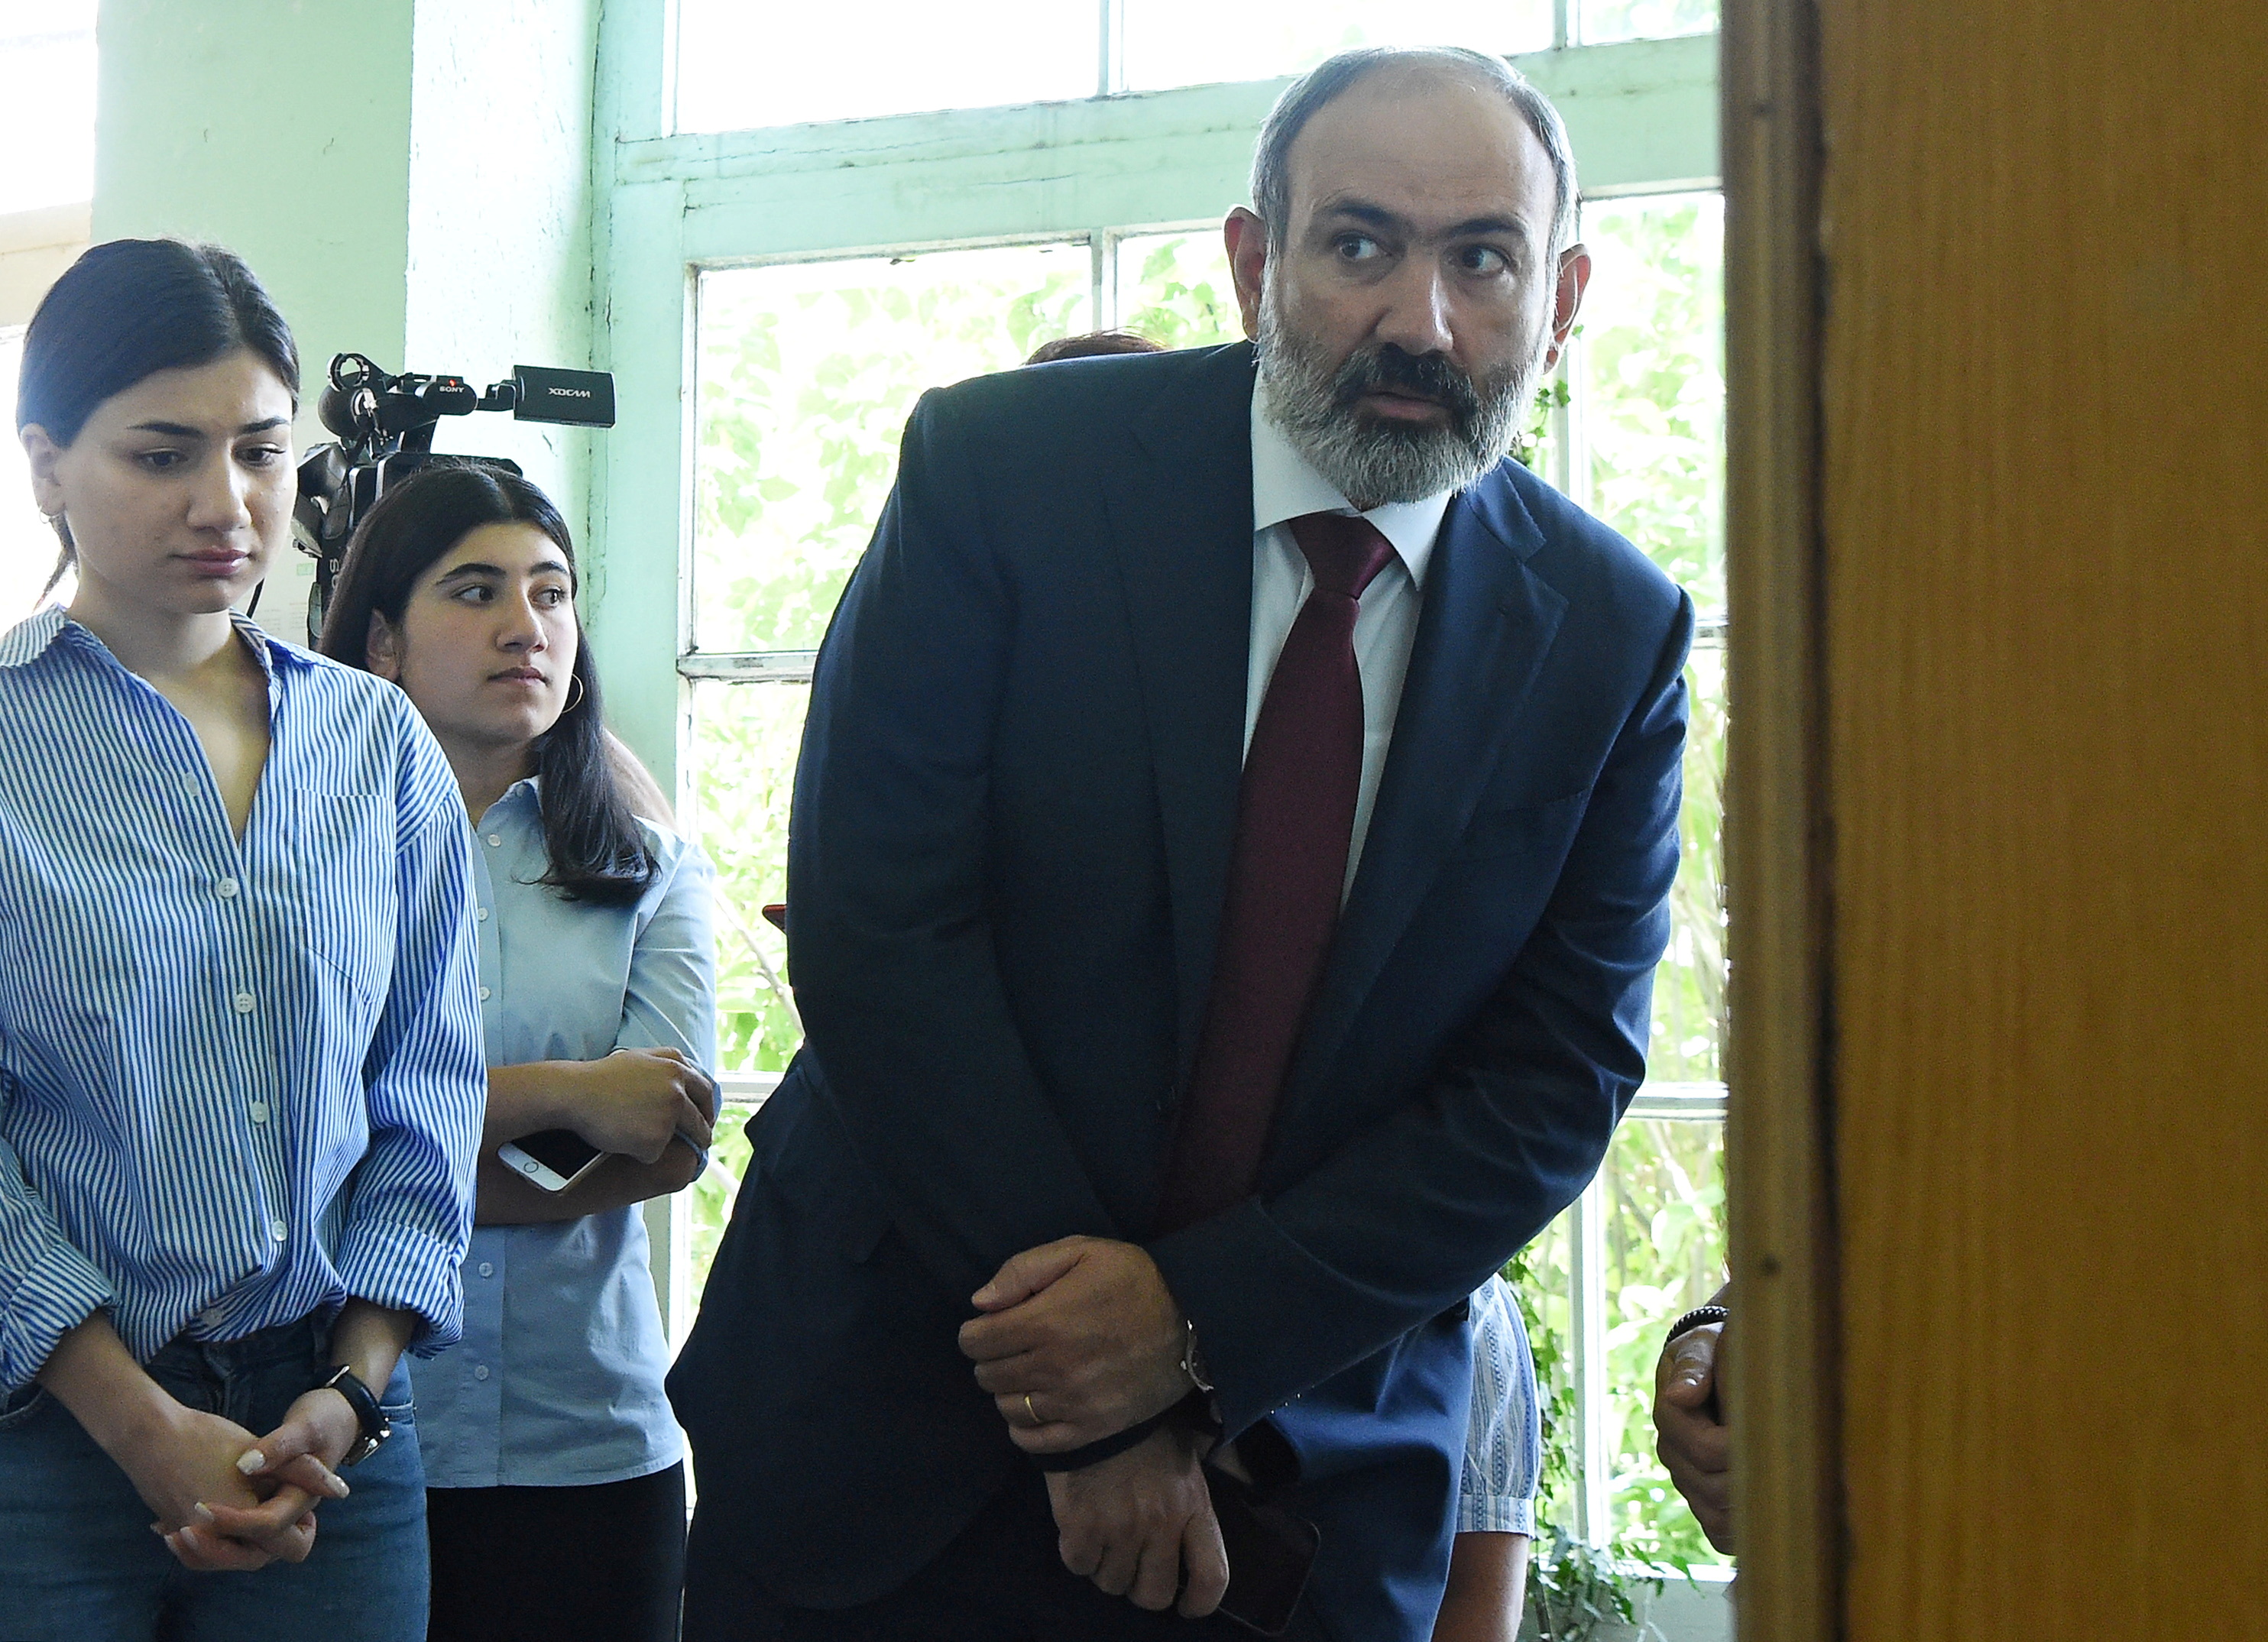 Leader of Civil Contract party Nikol Pashinyan casts his vote during the snap parliamentary election in Yerevan